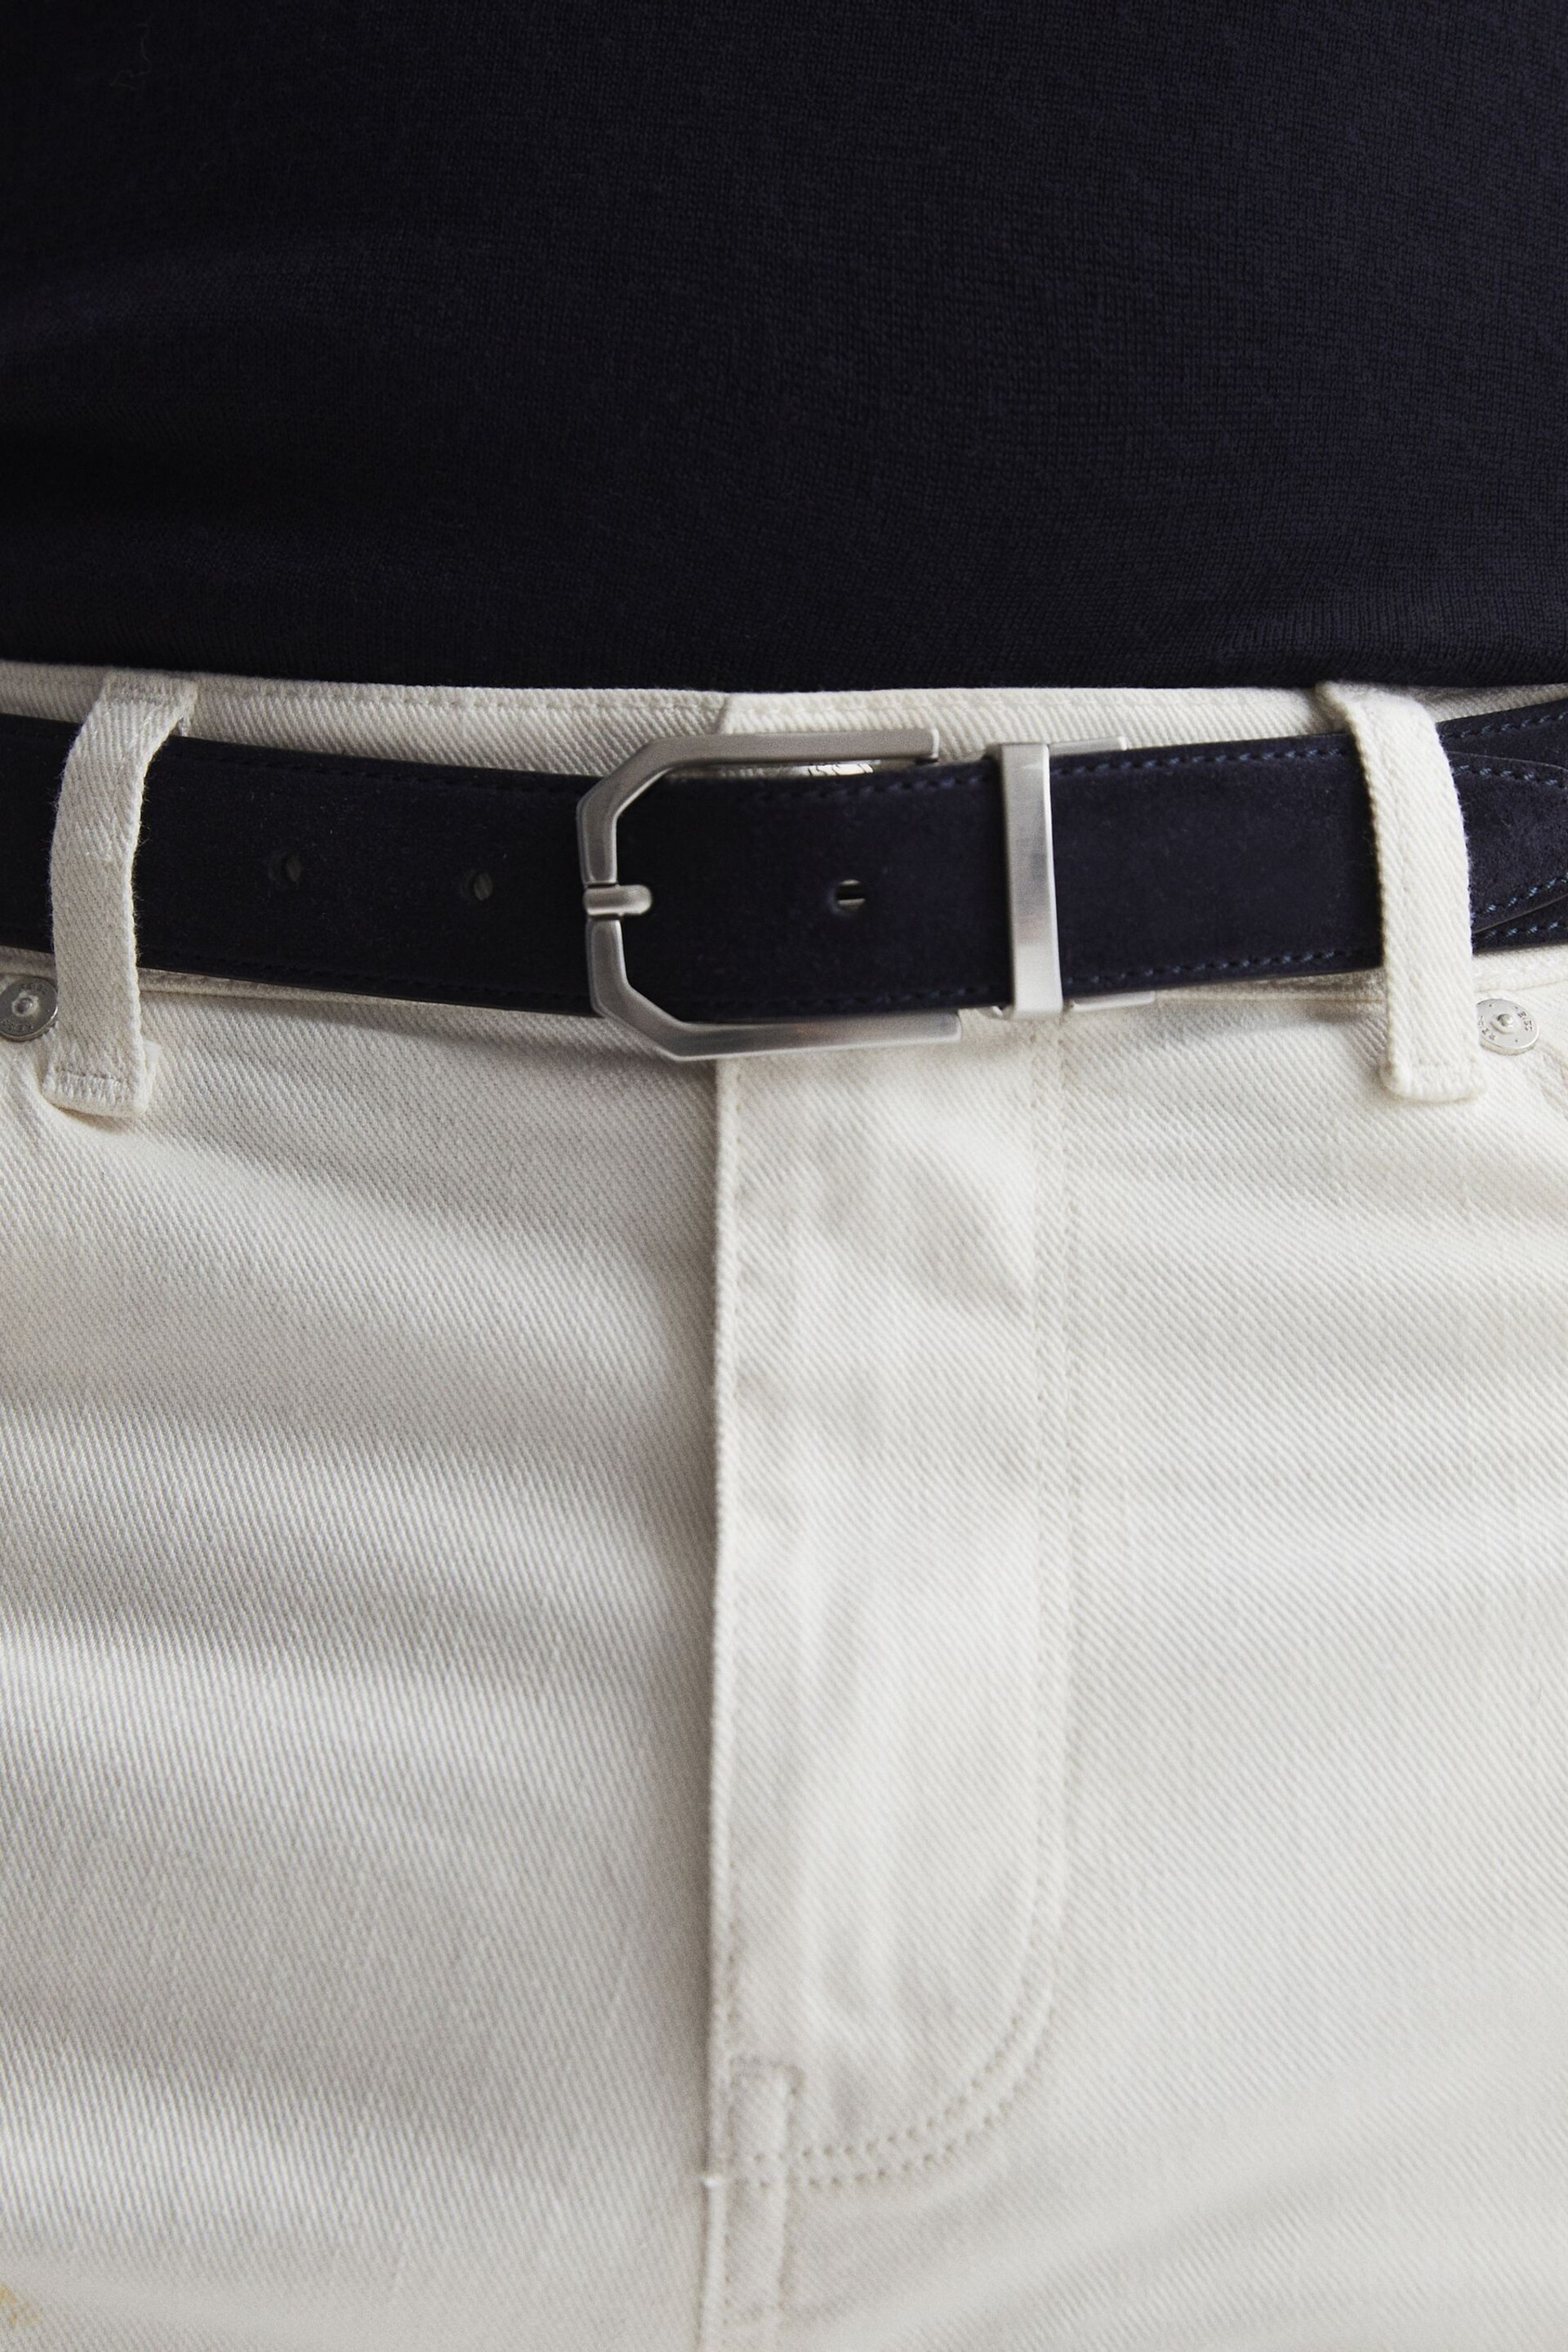 Reiss Navy/Black Aldwych Reversible Leather And Suede Belt - Image 2 of 7